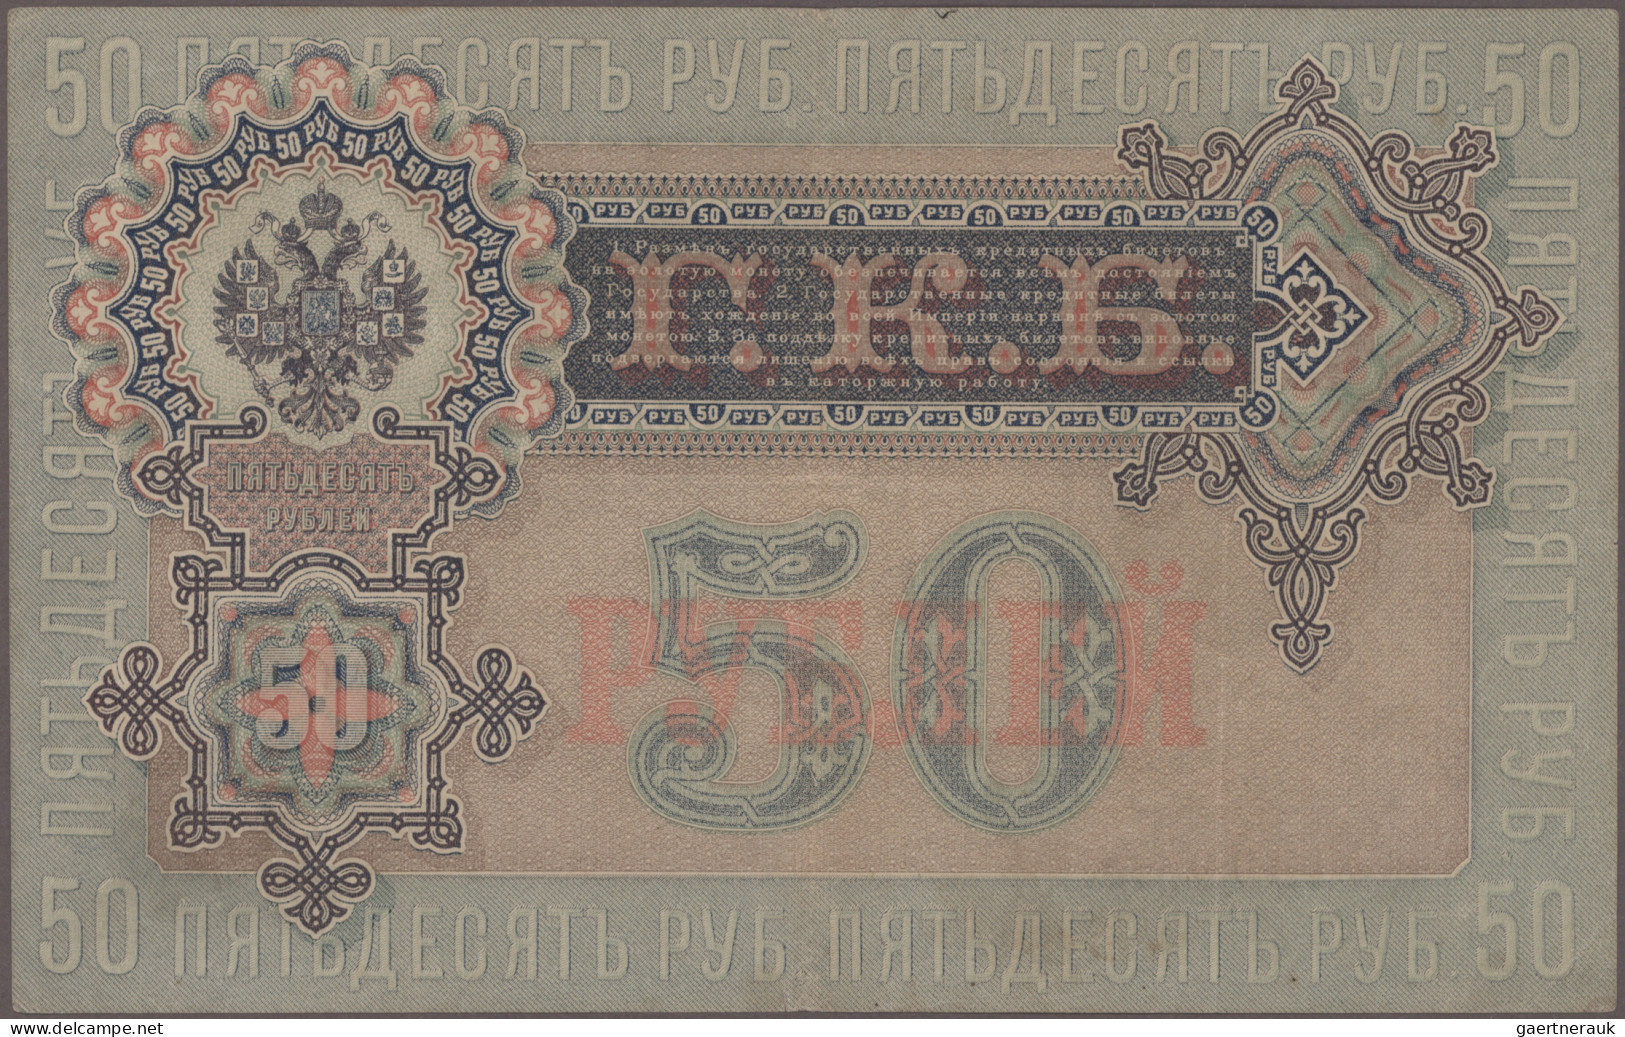 Russia - Bank Notes: Collectors album with 128 banknotes Russia State Issues 189